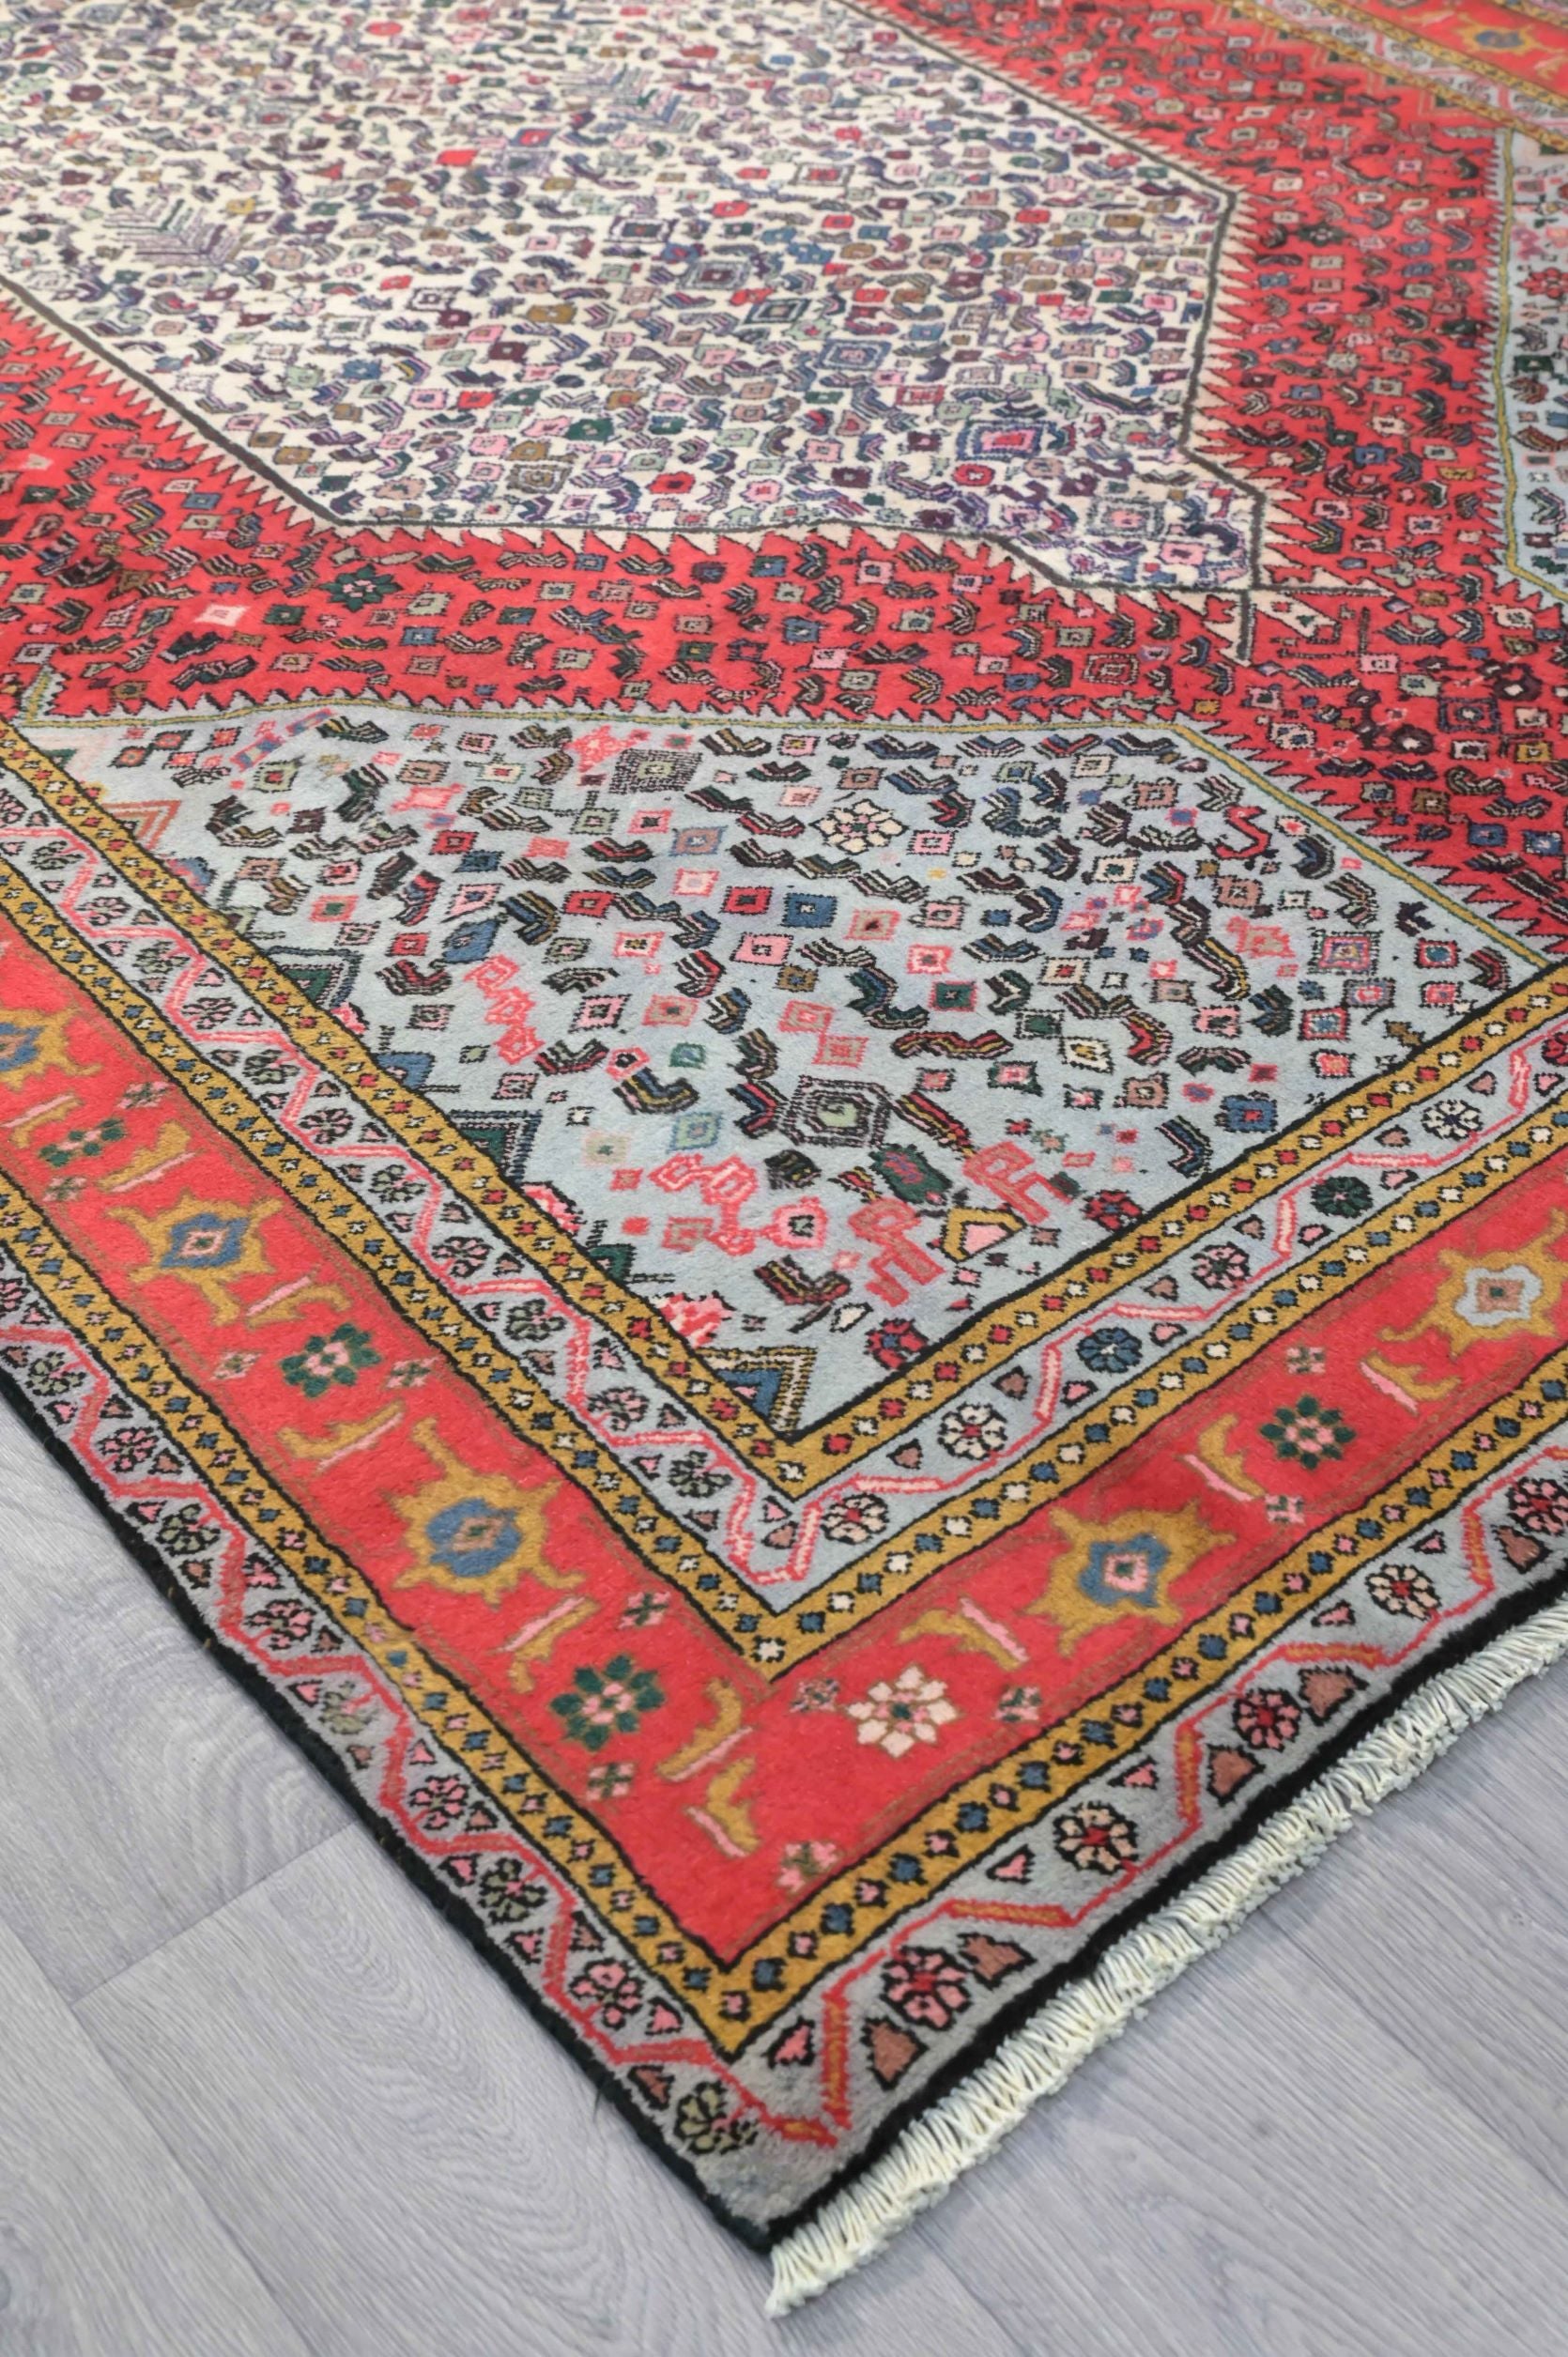 Handknotted Persian Ardebil Multicolour Design with Red and Orange tones (297h x 195w)